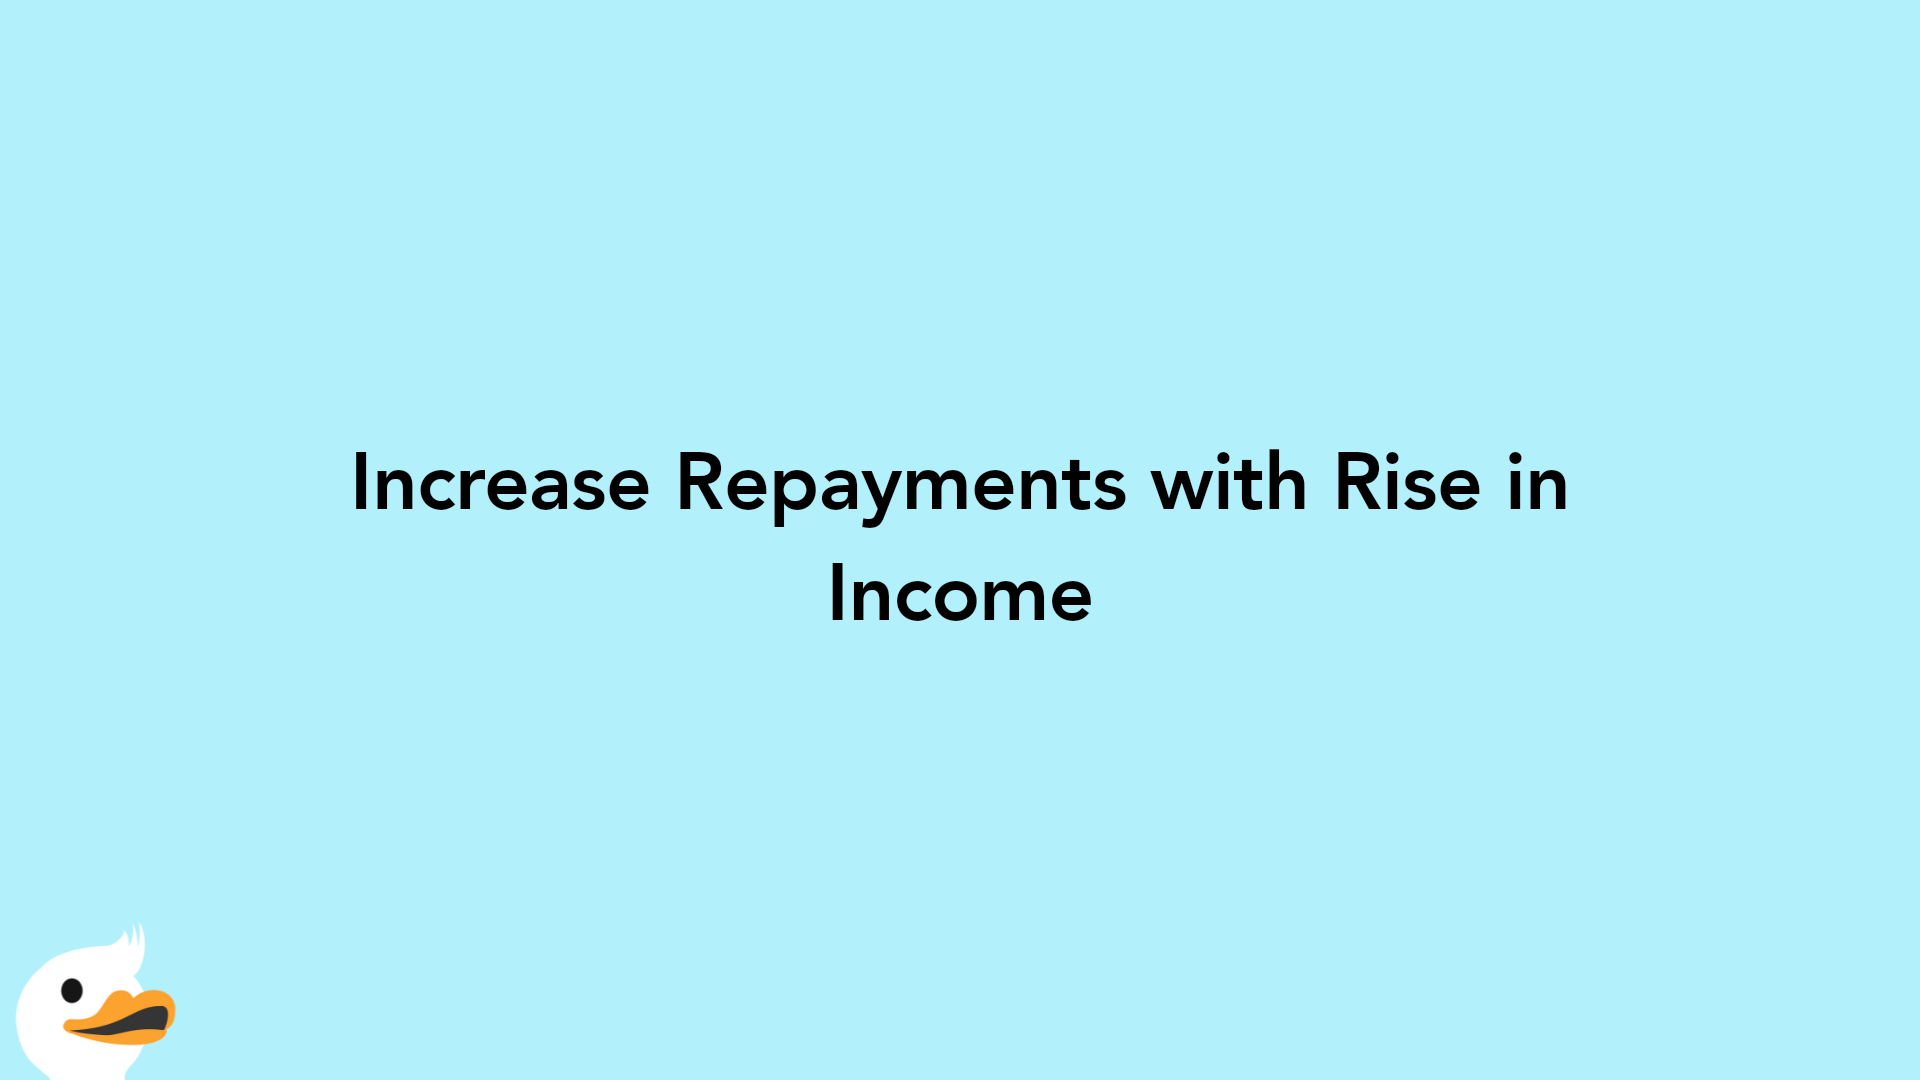 Increase Repayments with Rise in Income